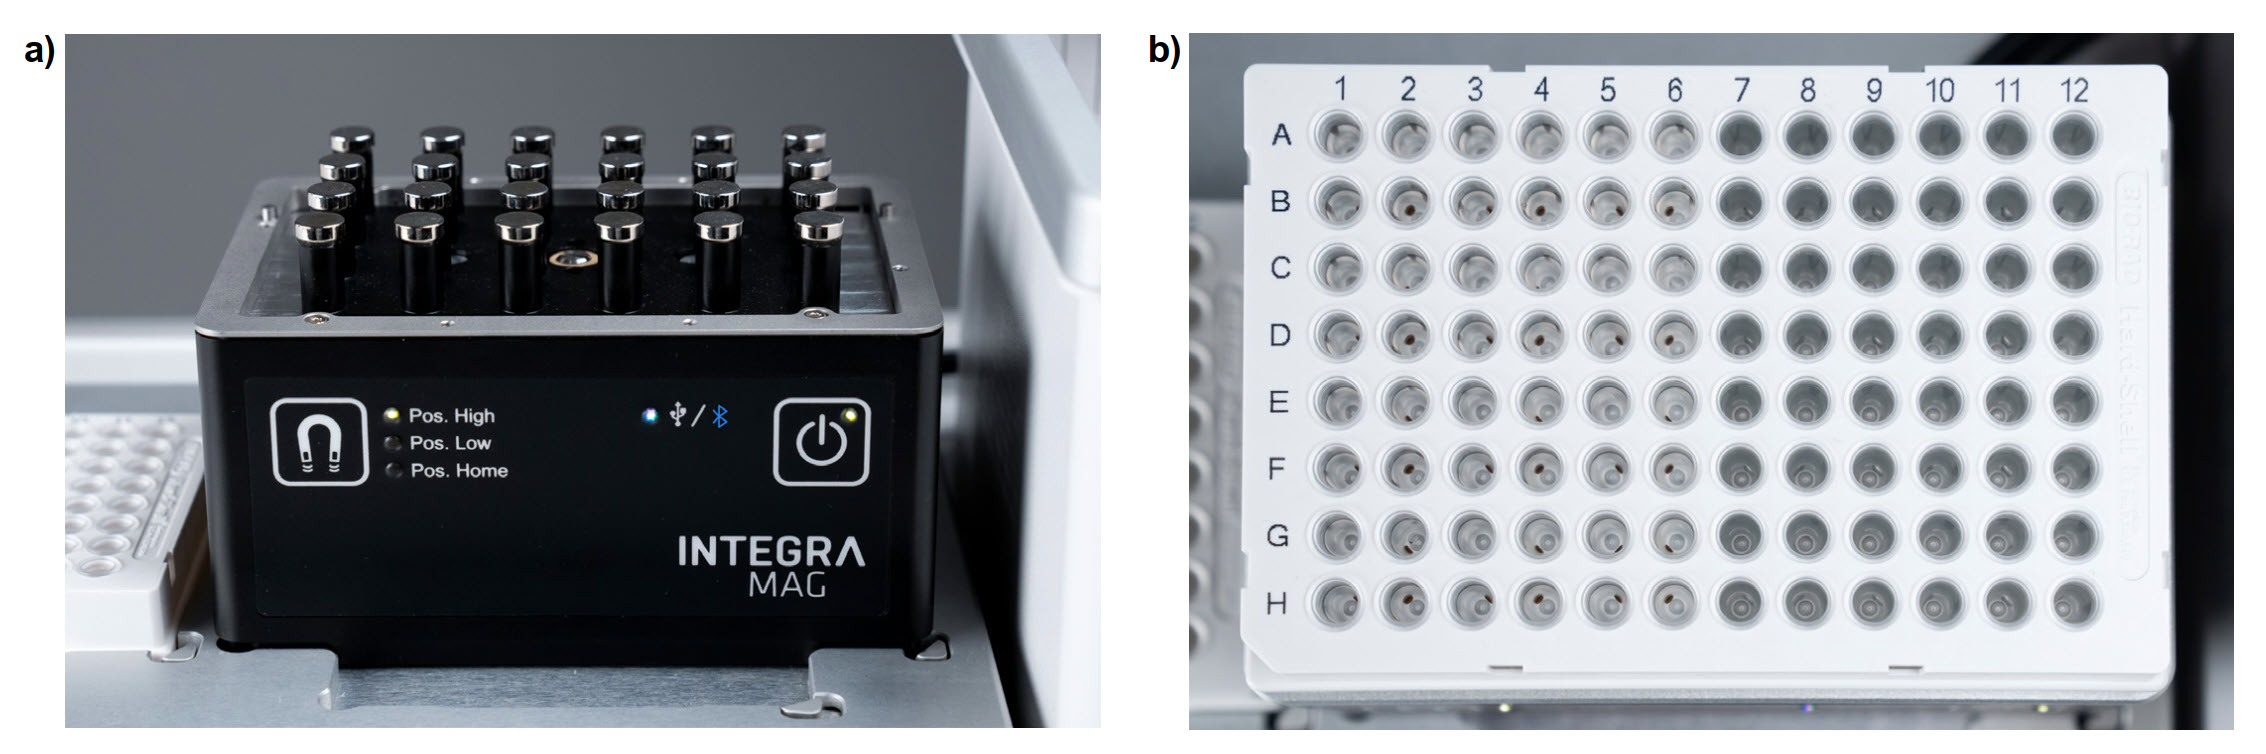 MAG on ASSIST PLUS (a) without 96 well PCR plate adapter showing engaged magnet array (position high, 29 mm), and (b) with 96 well PCR plate adapter and 96 well HardShell PCR plate showing captured magnetic beads after 3 minutes.